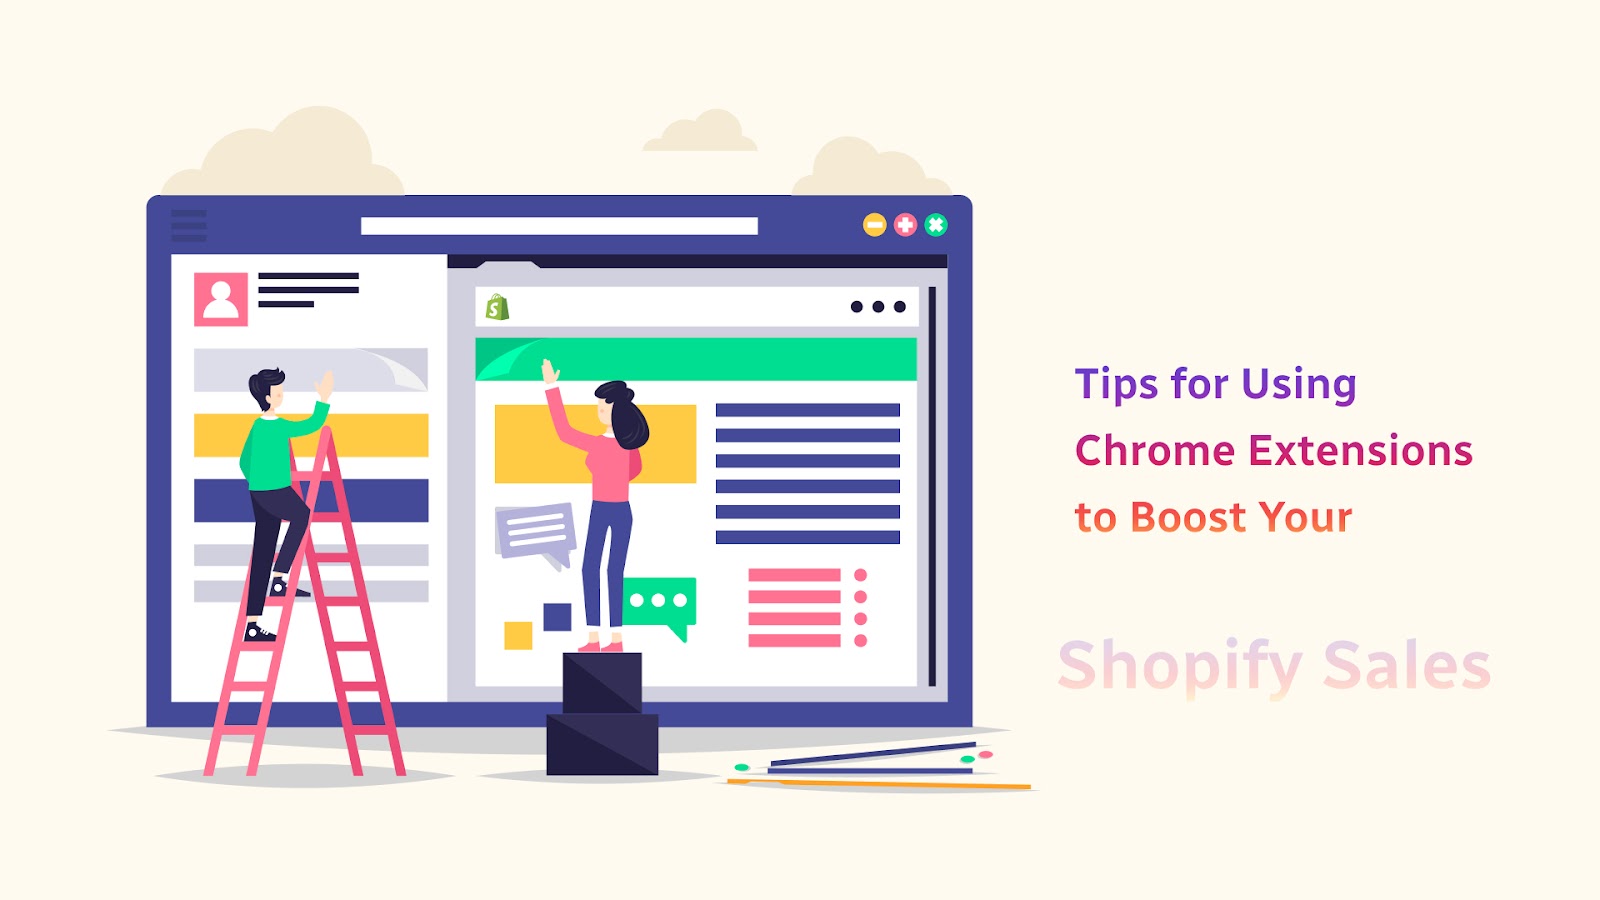 Tips for Using Chrome Extensions to Boost Your Shopify Sales